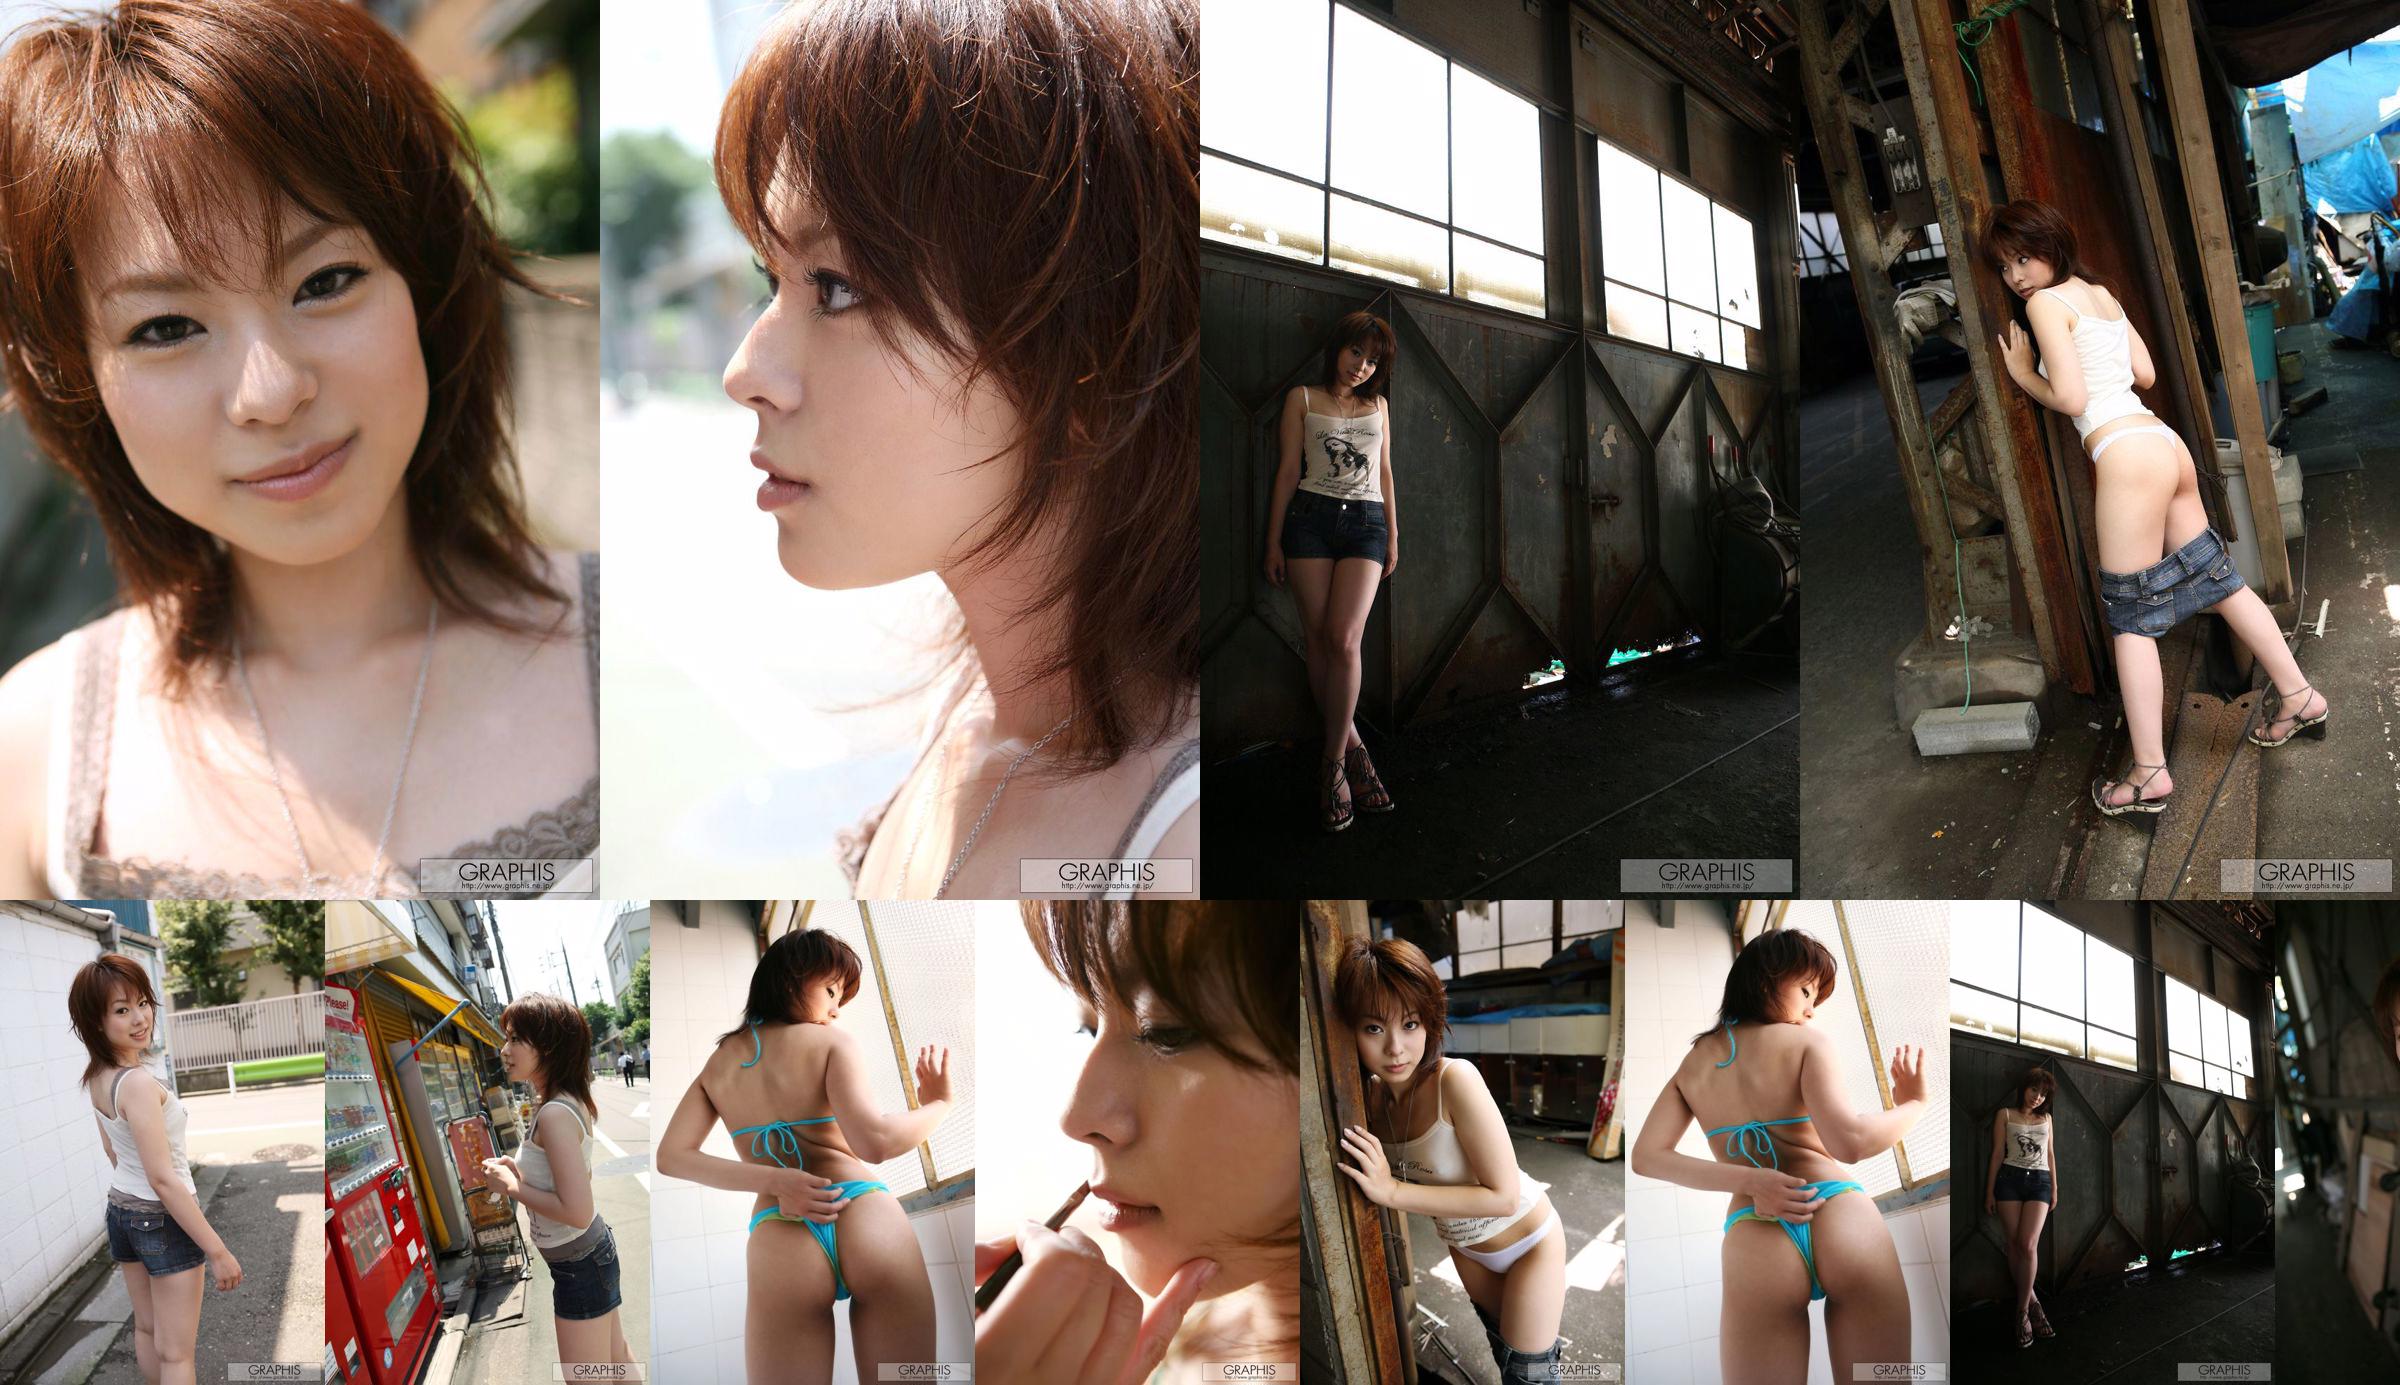 Mina Manabe Mina Manabe [Graphis] First Gravure First Take Off Daughter No.f32443 Pagina 1